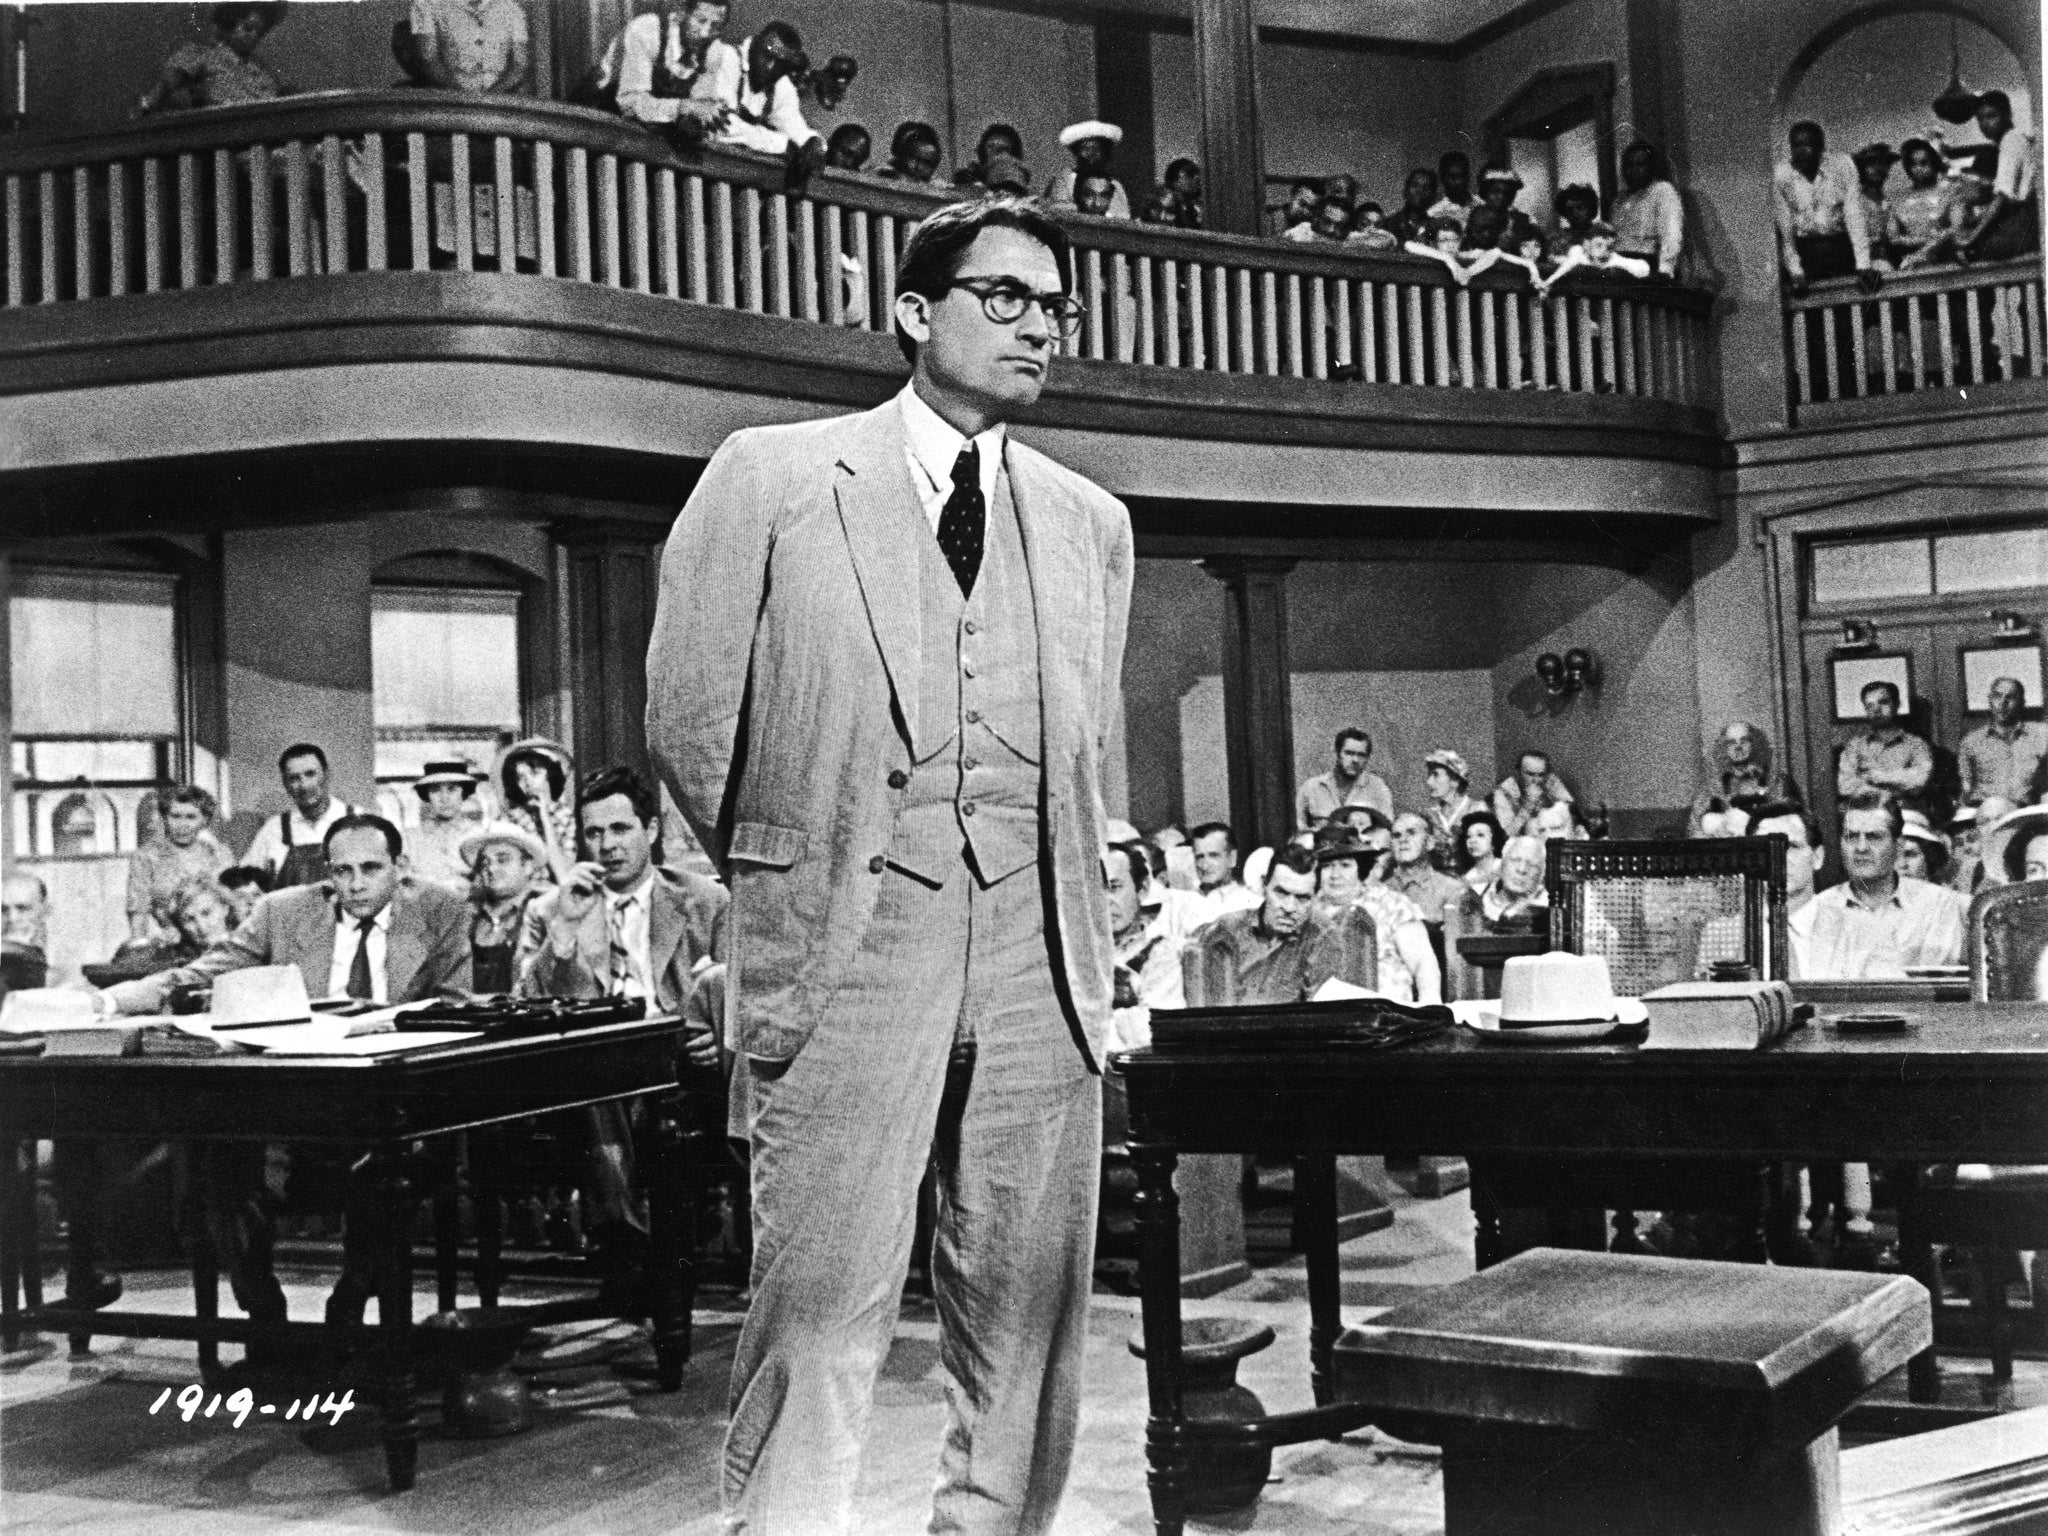 &#13;
Gregory Peck in the 1962 film adaptation of To Kill a Mockingbird&#13;